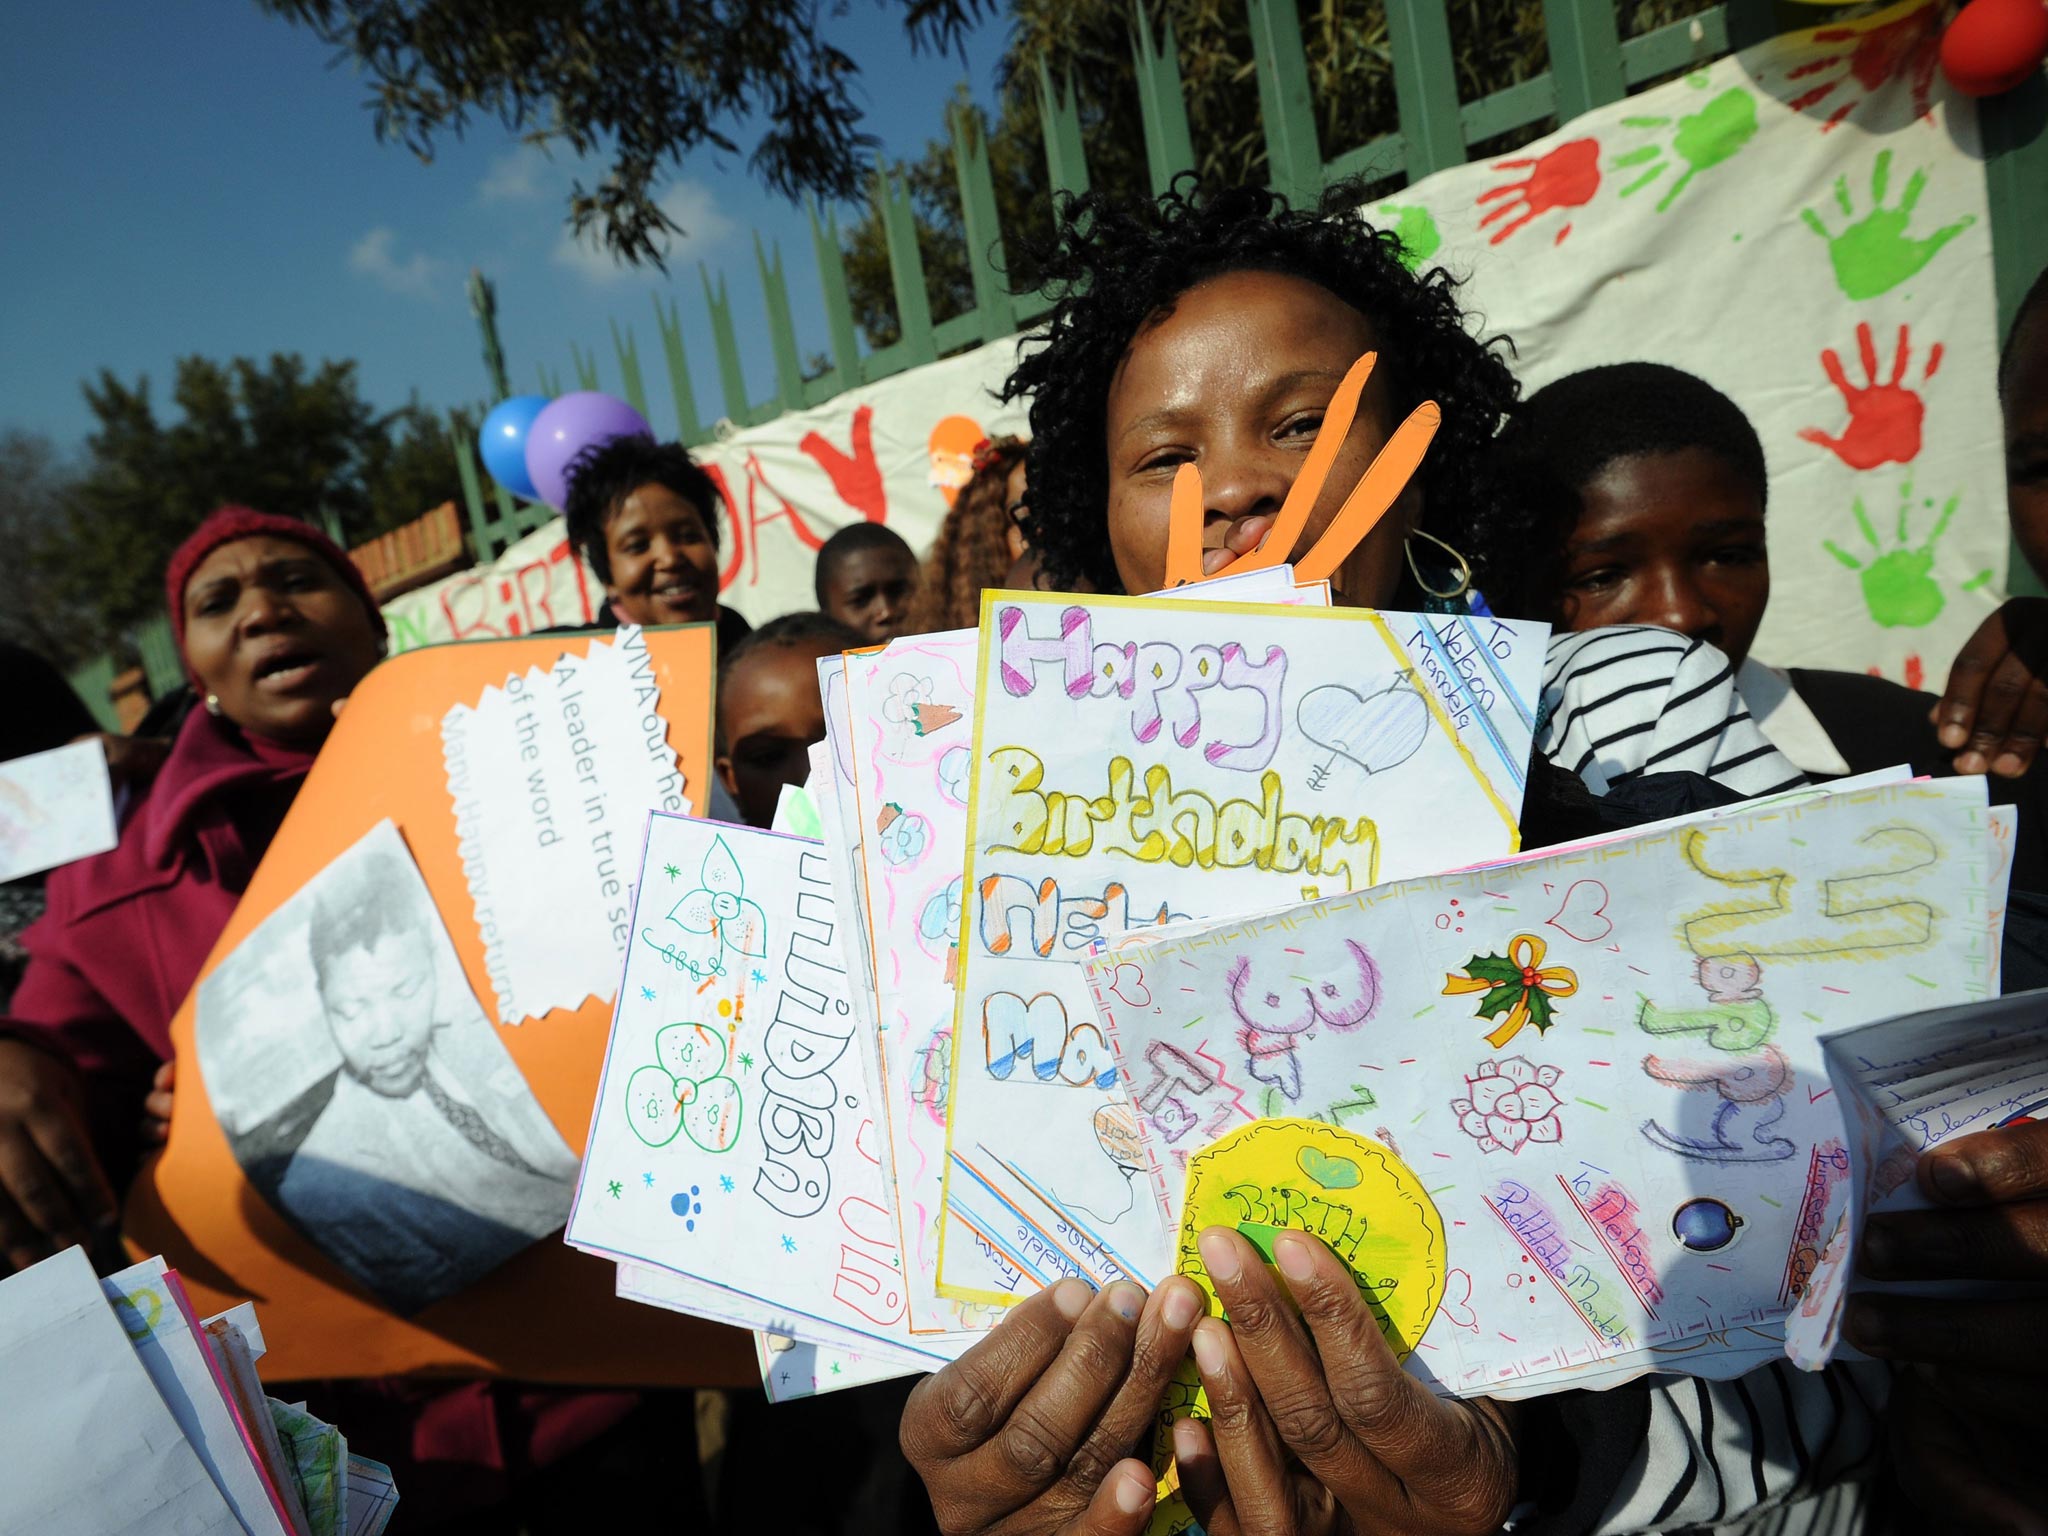 Teachers and students from The Lukho Lwen School hold cards wishing former South African Nelson Mandela a happy birthday on Mandela Day in Soweto